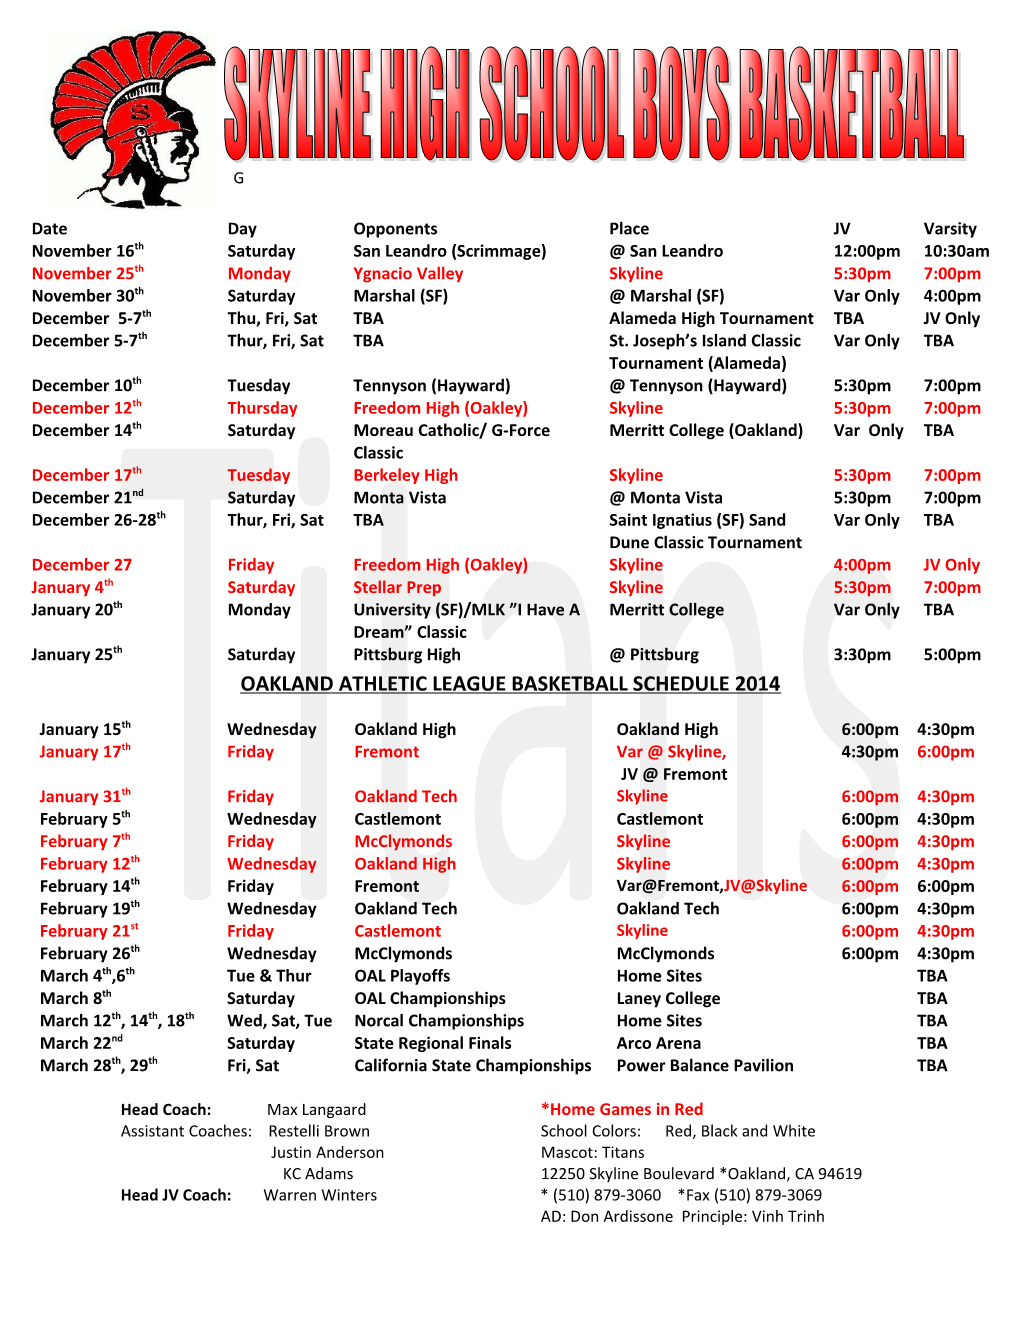 Oakland Athletic League Basketball Schedule 2014